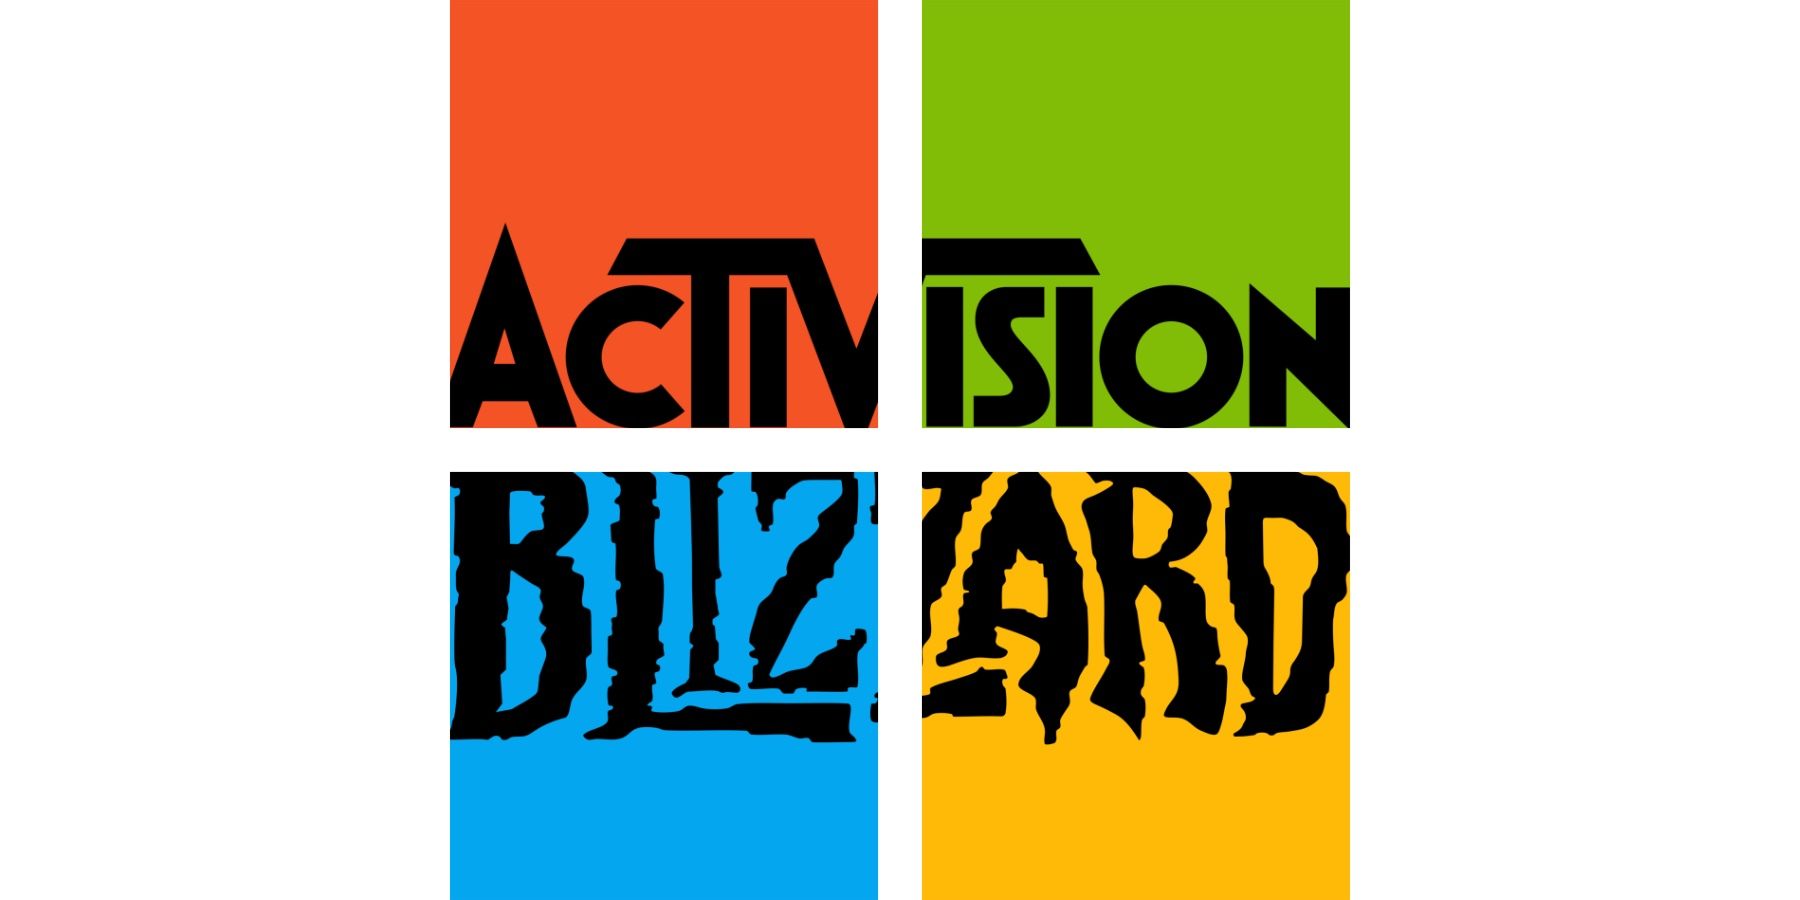 Microsoft Activision Blizzard clipped logos GR